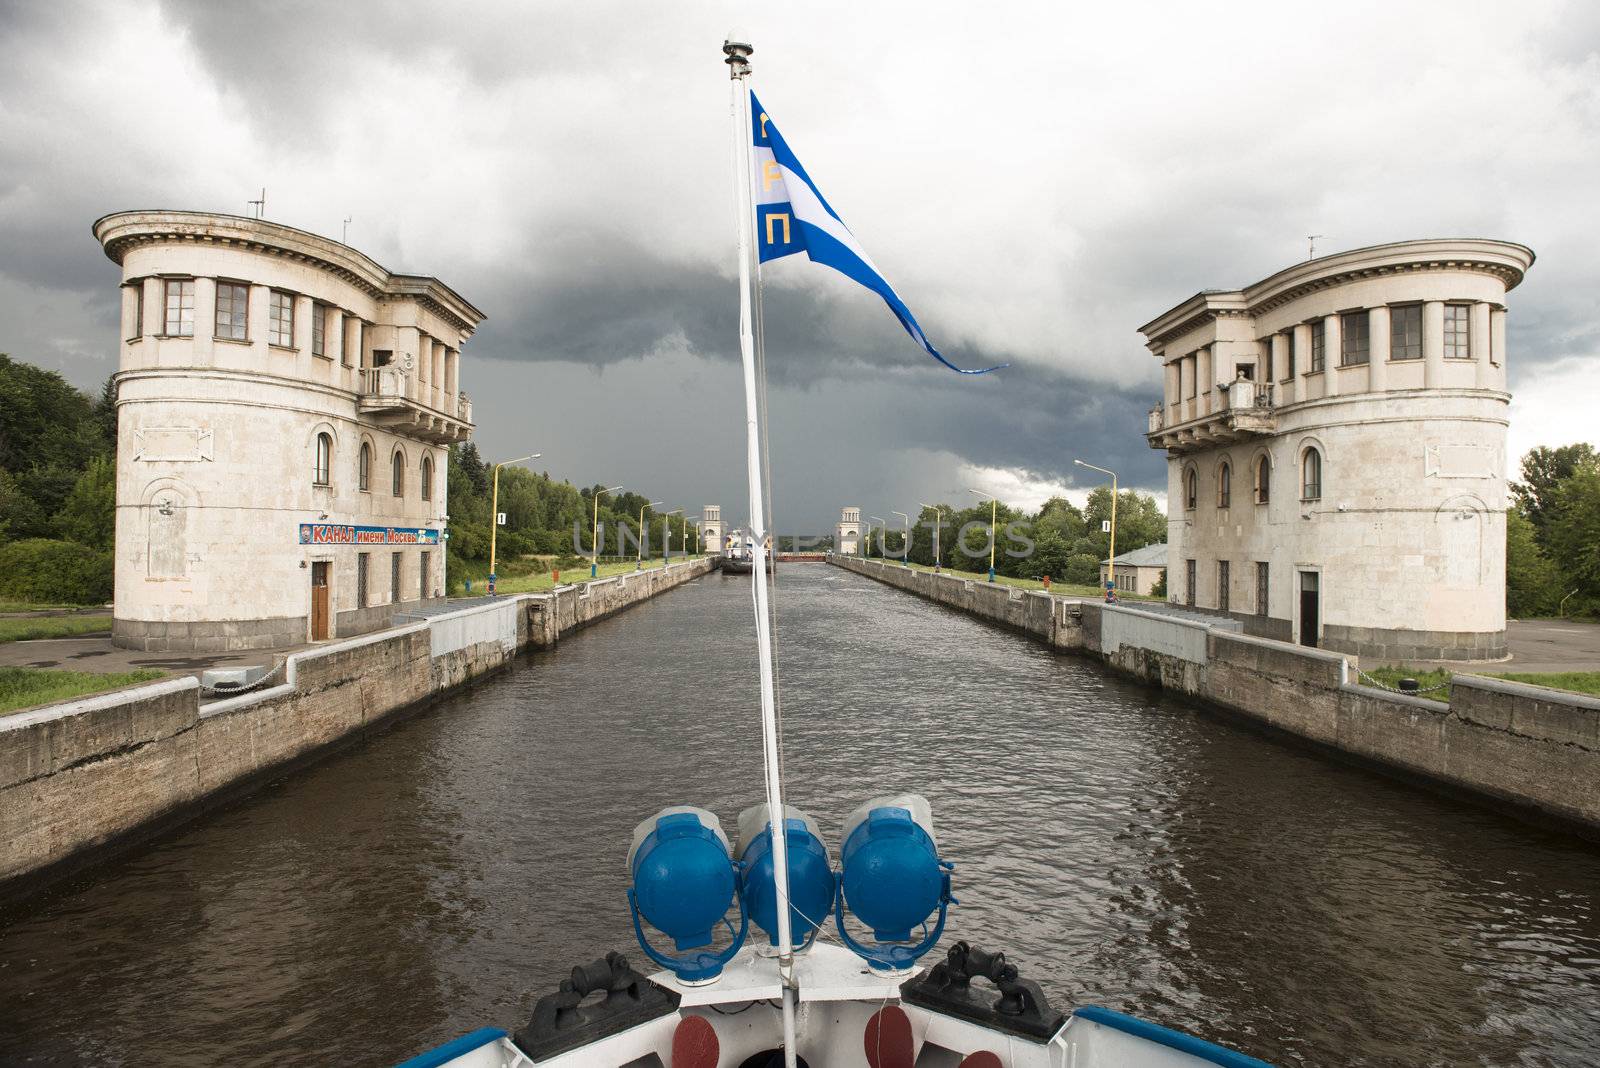 River lock on the Moscow canal. Taken on July 2012.